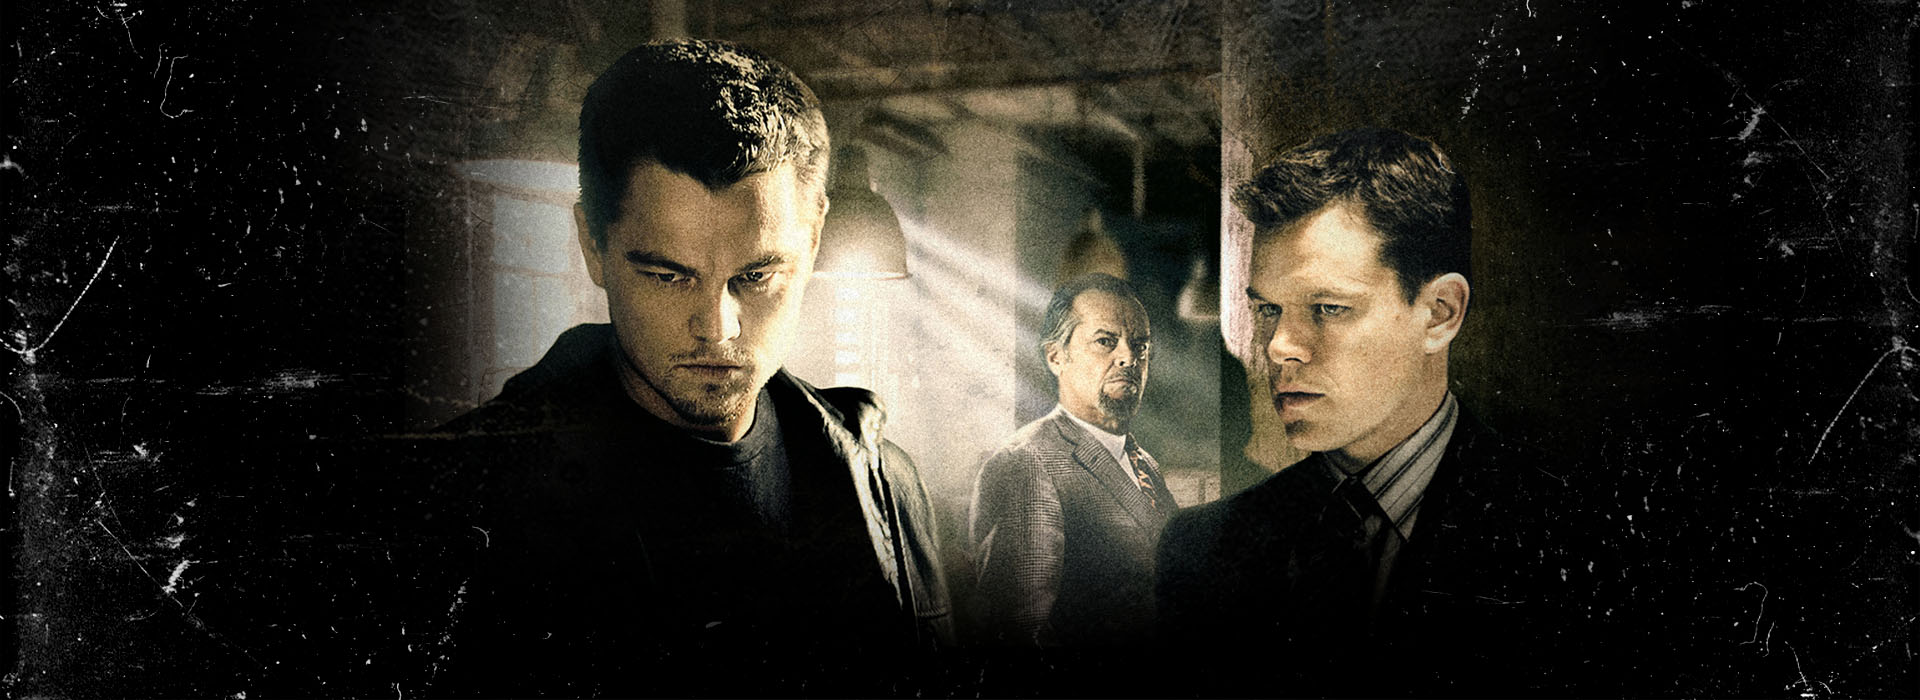 Movie poster The Departed